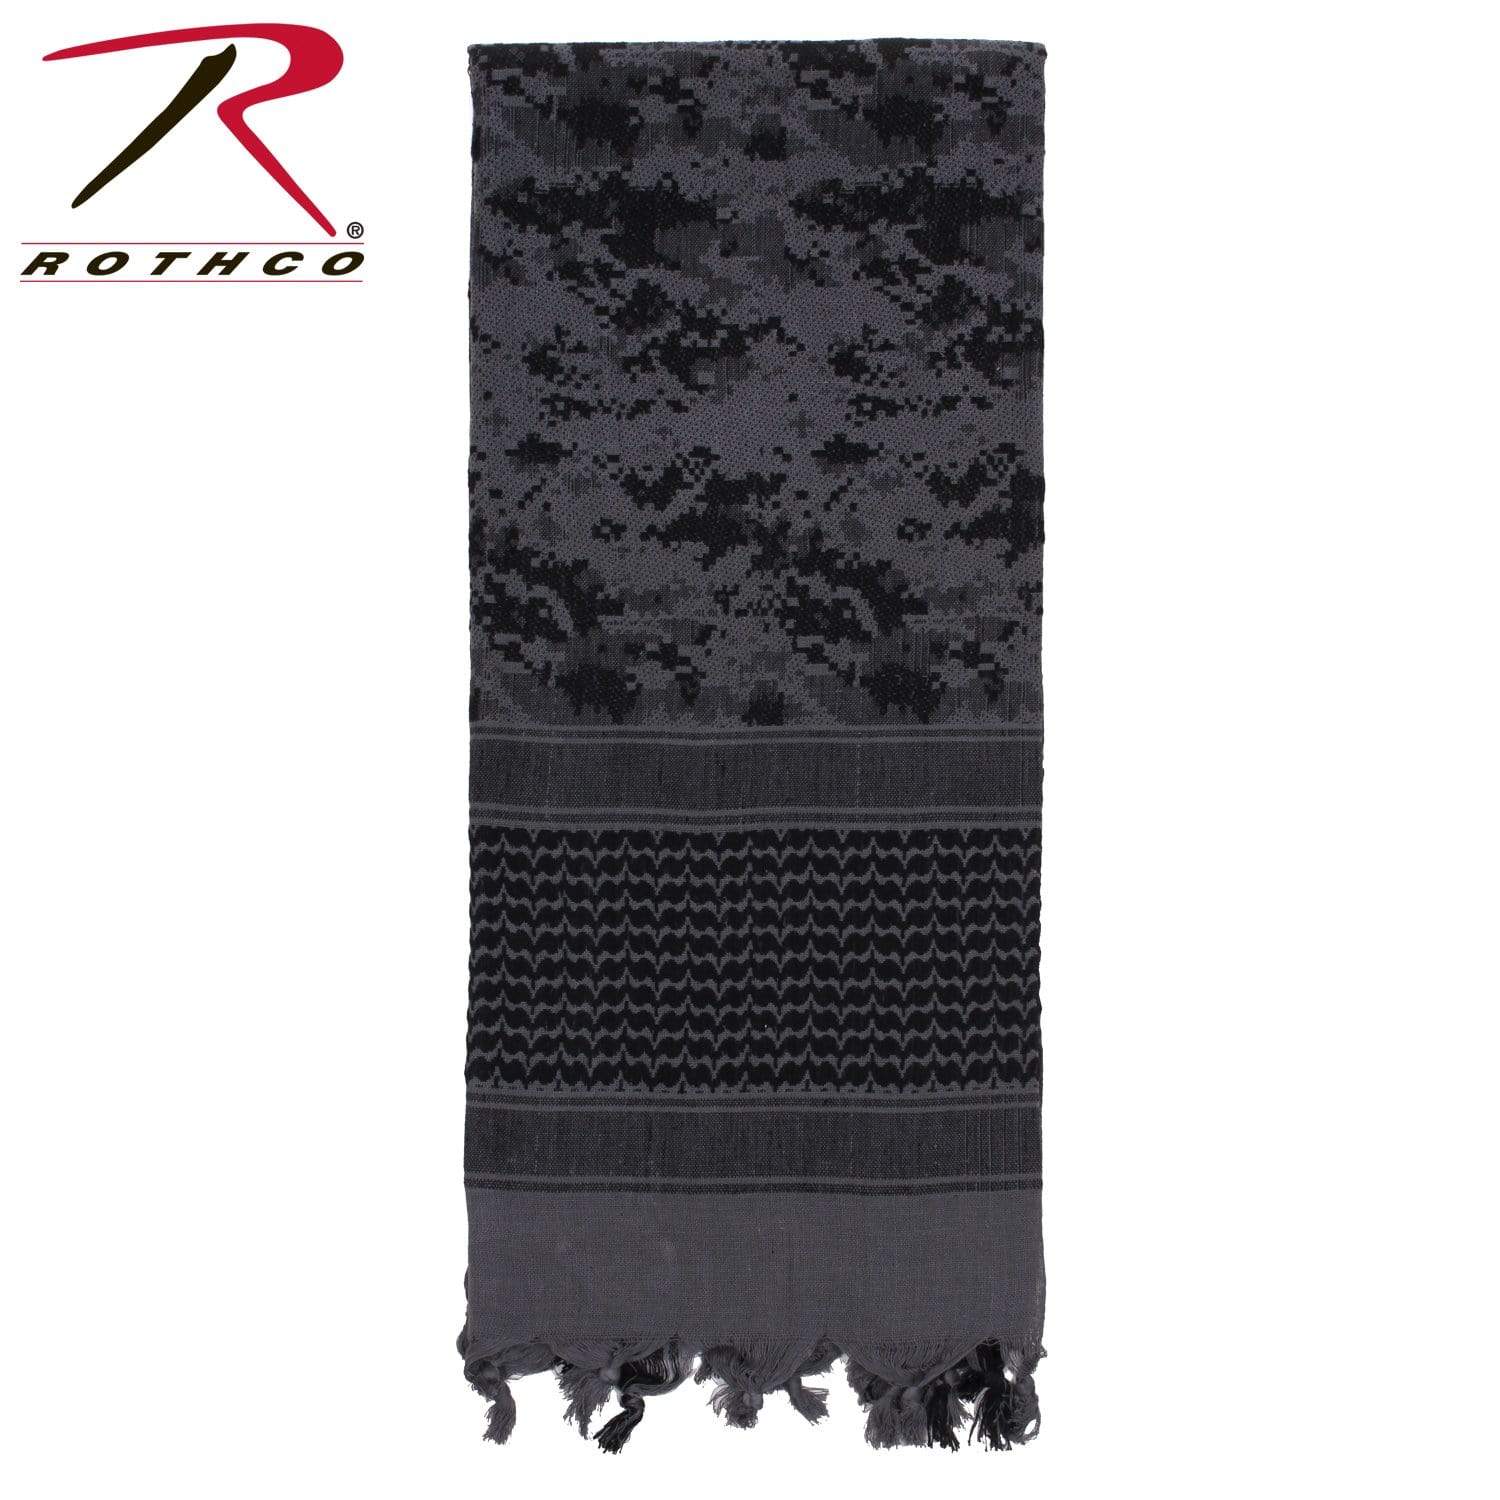 Rothco Digital Camo Shemagh Tactical Desert Keffiyeh Scarf - Subdued Urban Digital - Eminent Paintball And Airsoft